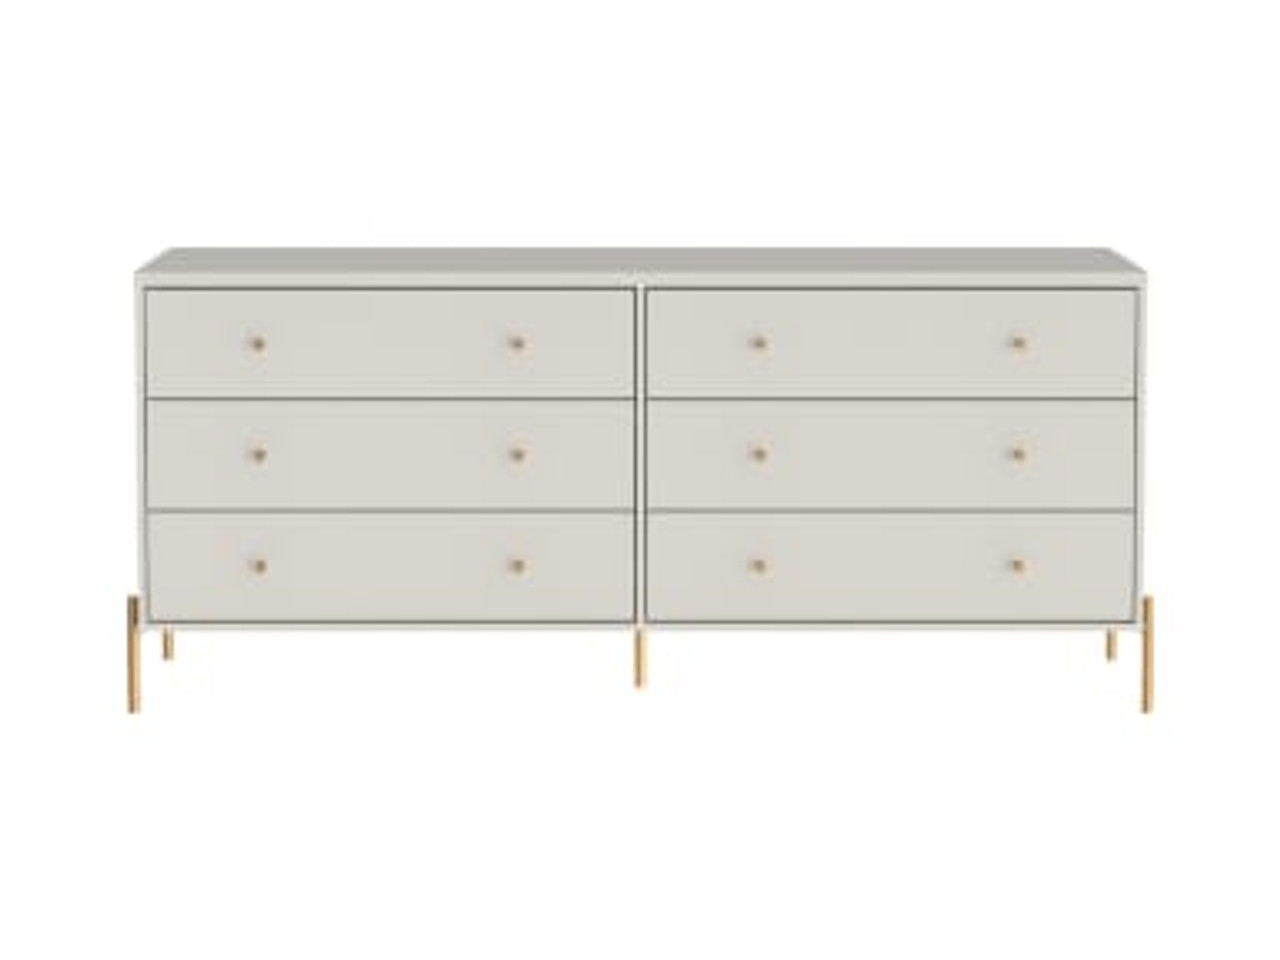 Jasper Full Extension Tall Dresser and Double Wide Dresser Set of 2 in Off White